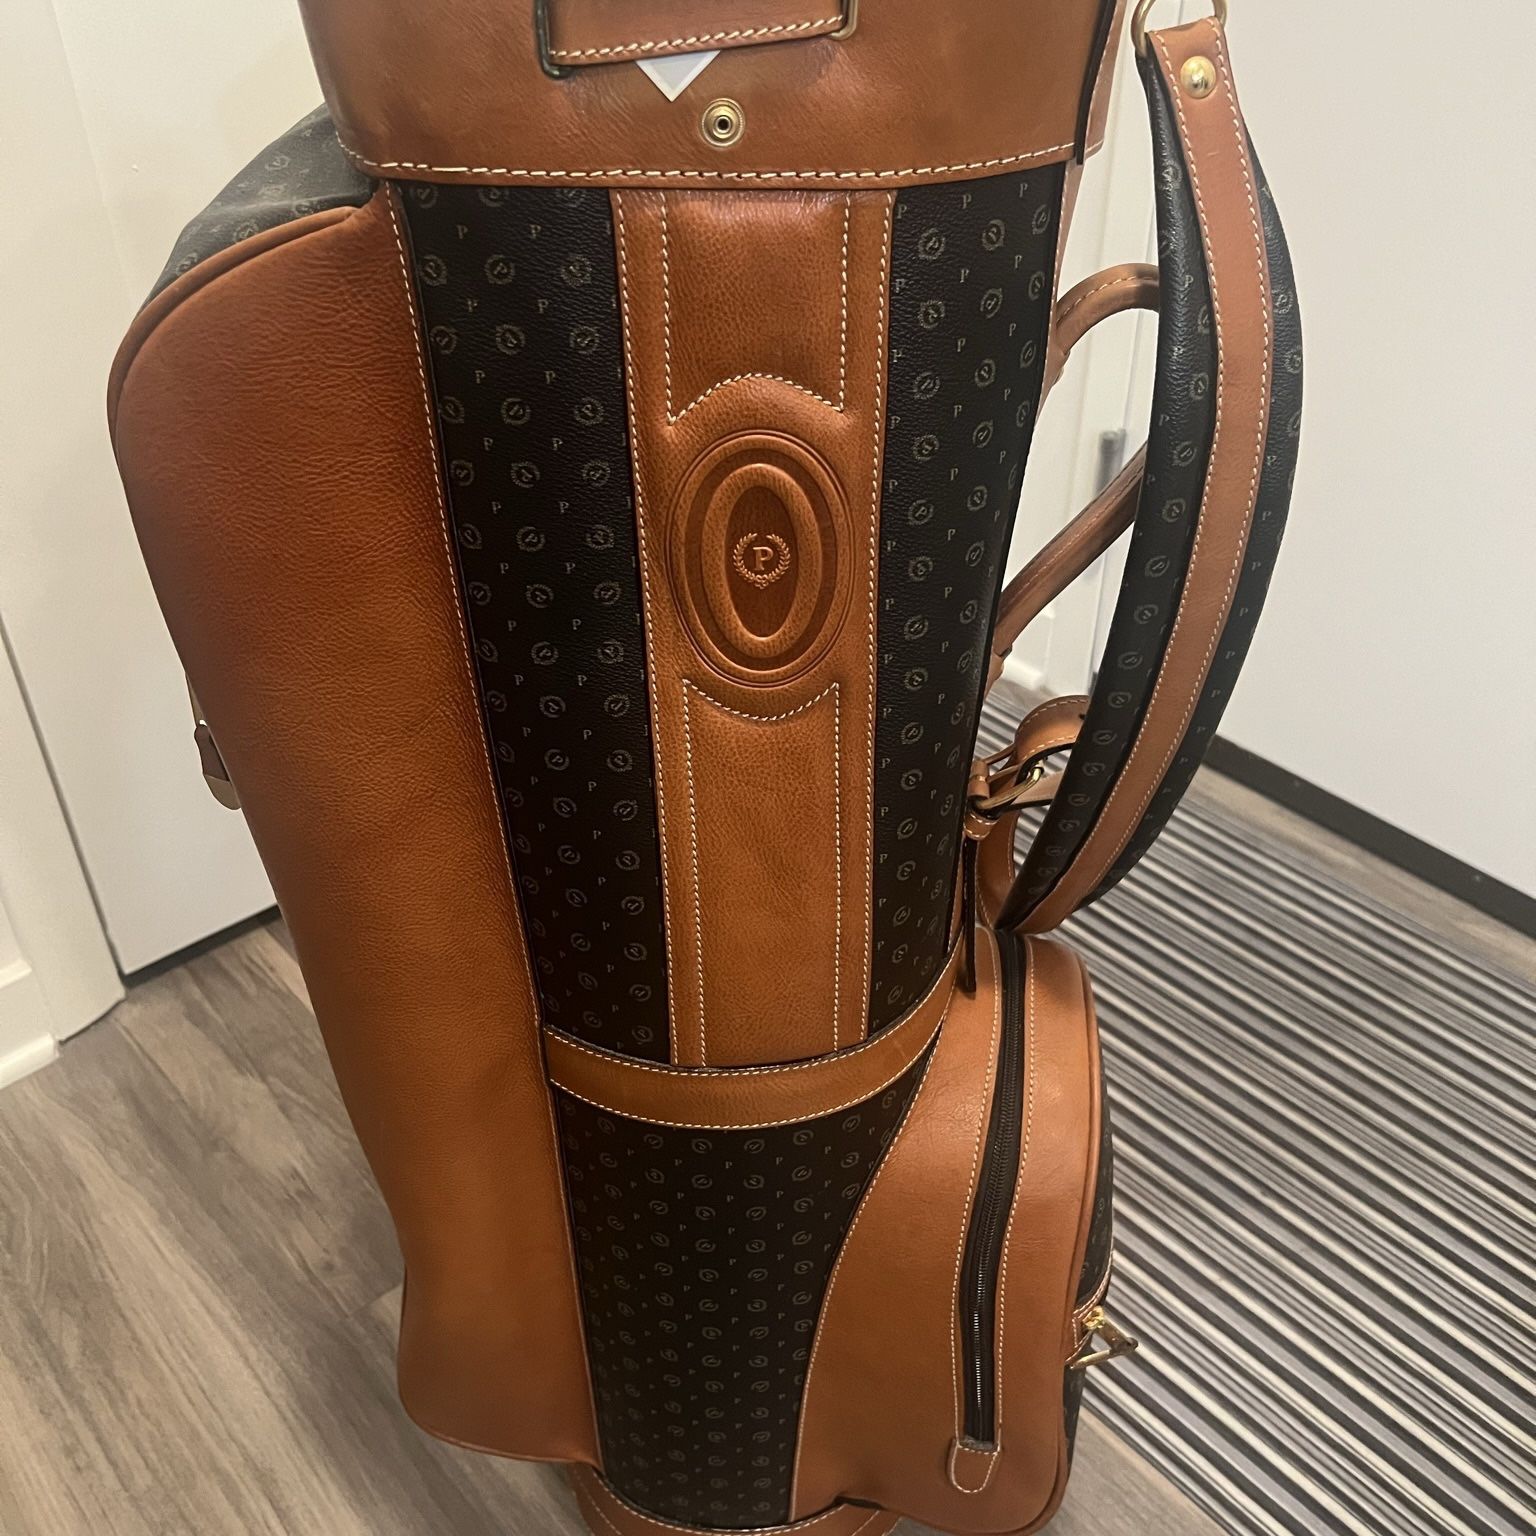 Pollini Leather Golf Bag for Sale in Pittsburgh, PA - OfferUp